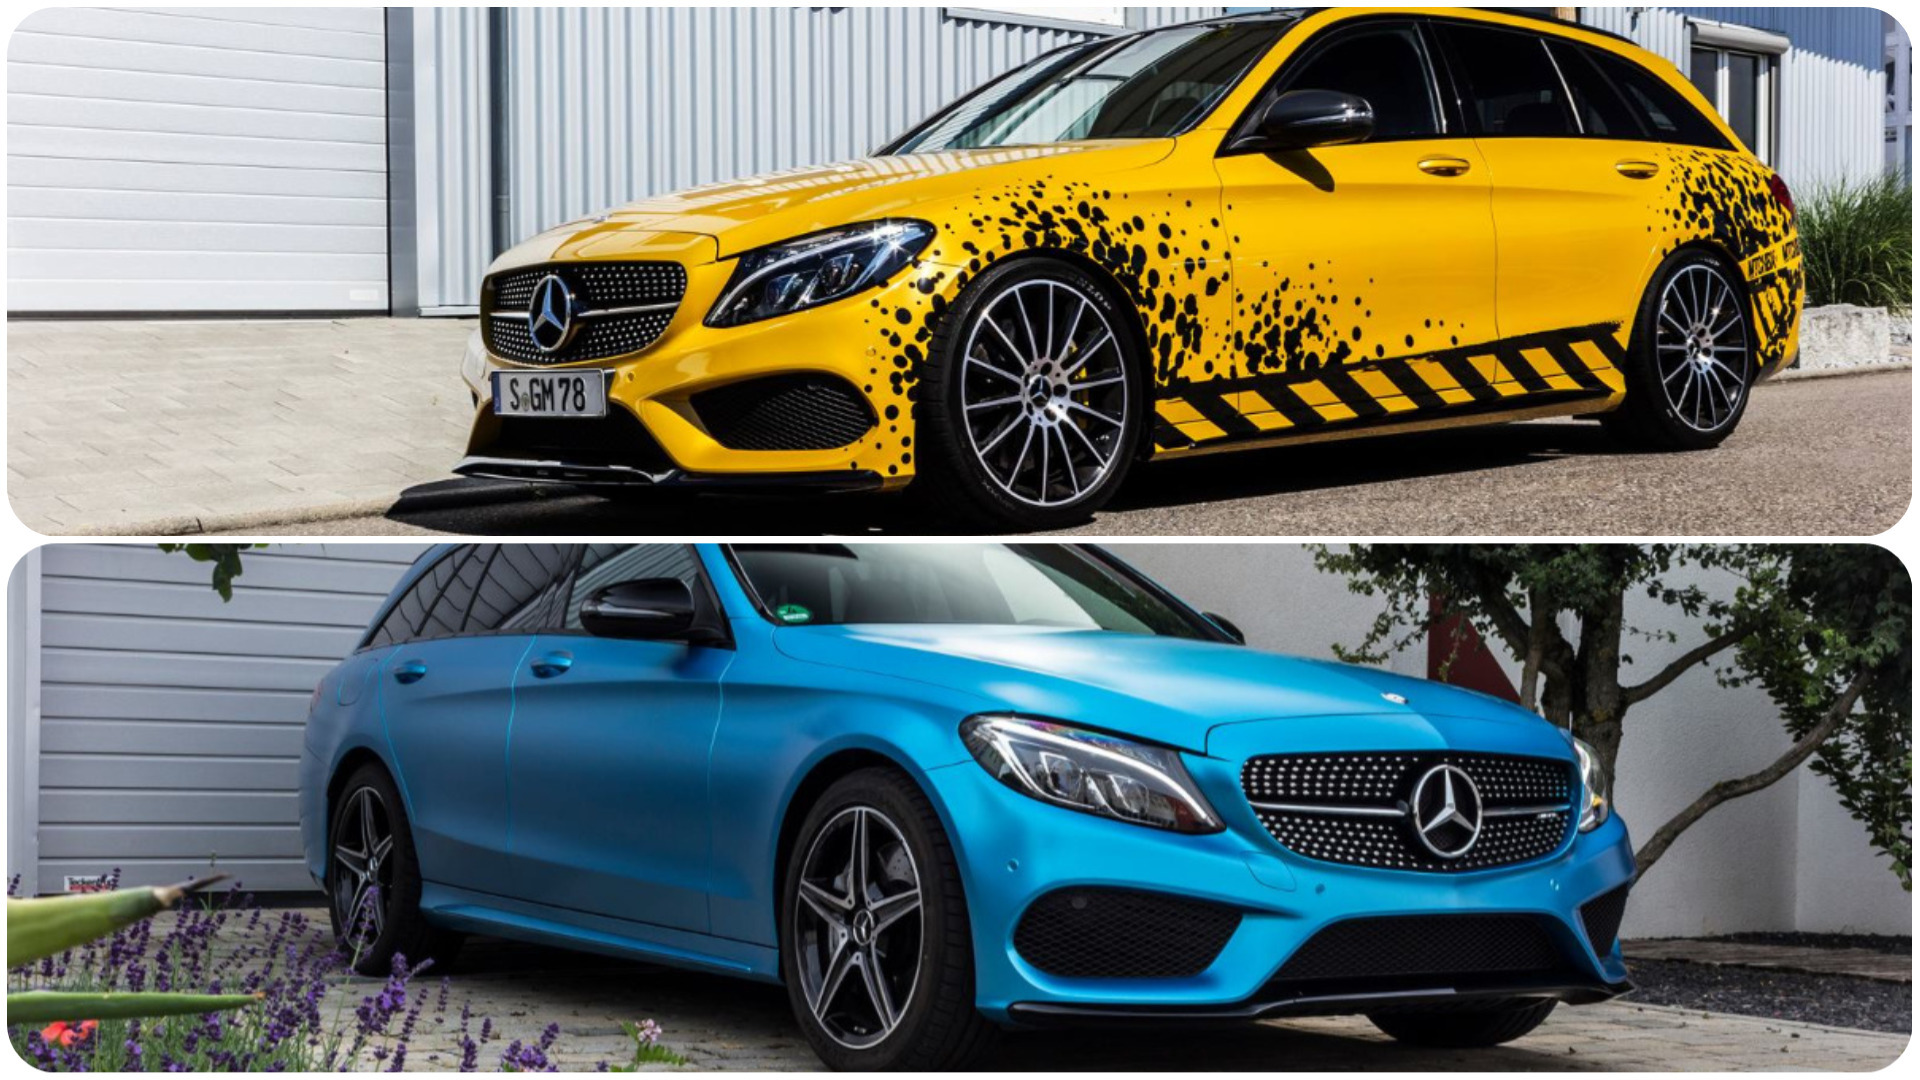 Charlotte Bronte Condition tribe Mercedes C450 AMG Yellow Taxi vs. C43 in Silky Blue: Wrap Battle